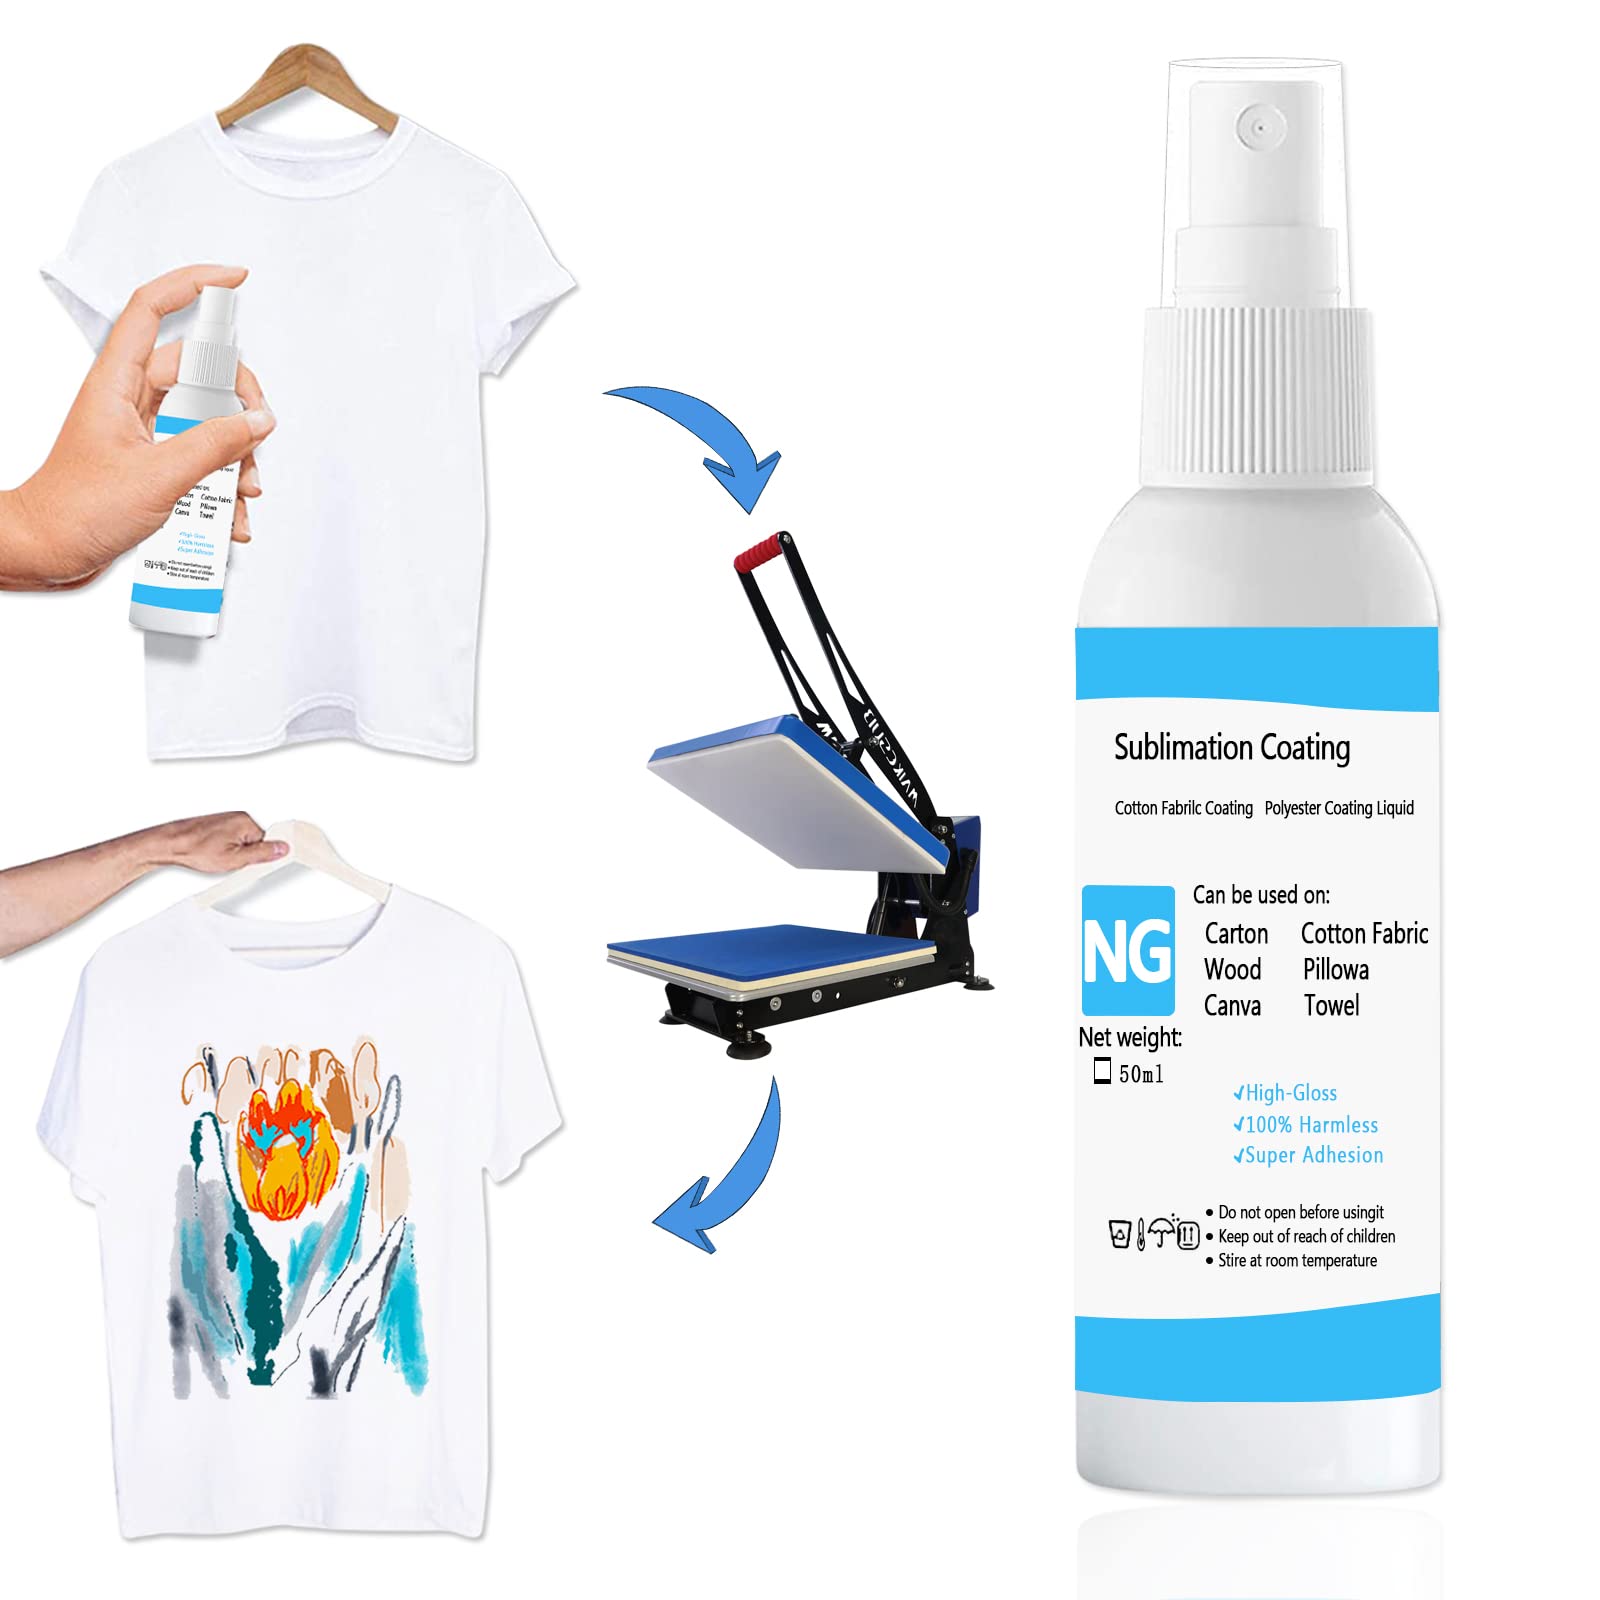 Sublimation Spray for 100% Cotton Shirts, 250ml Upgraded Formula Sublimation Coating Spray for All Fabric,High Gloss,Quick Drying and Super Adhesive